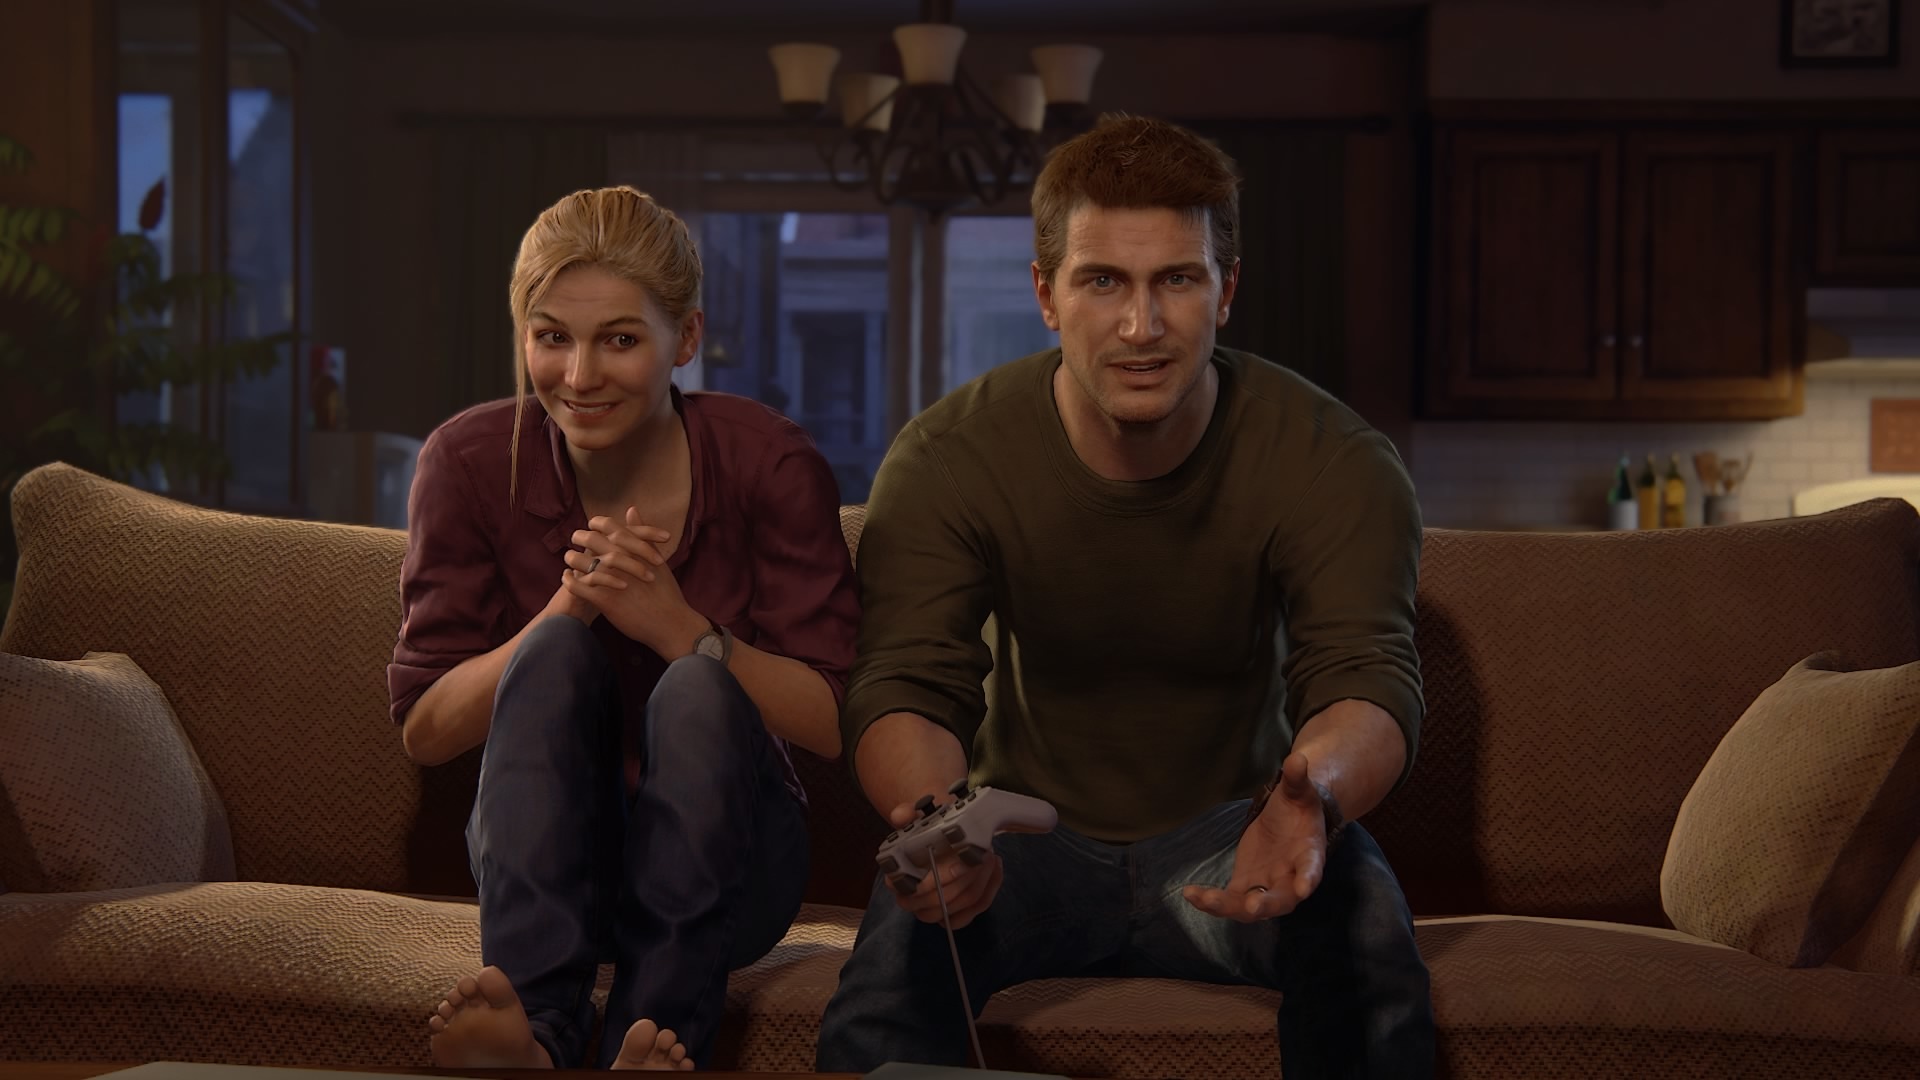 New Uncharted Games Hinted At By Naughty Dog Recruiter - PlayStation  Universe